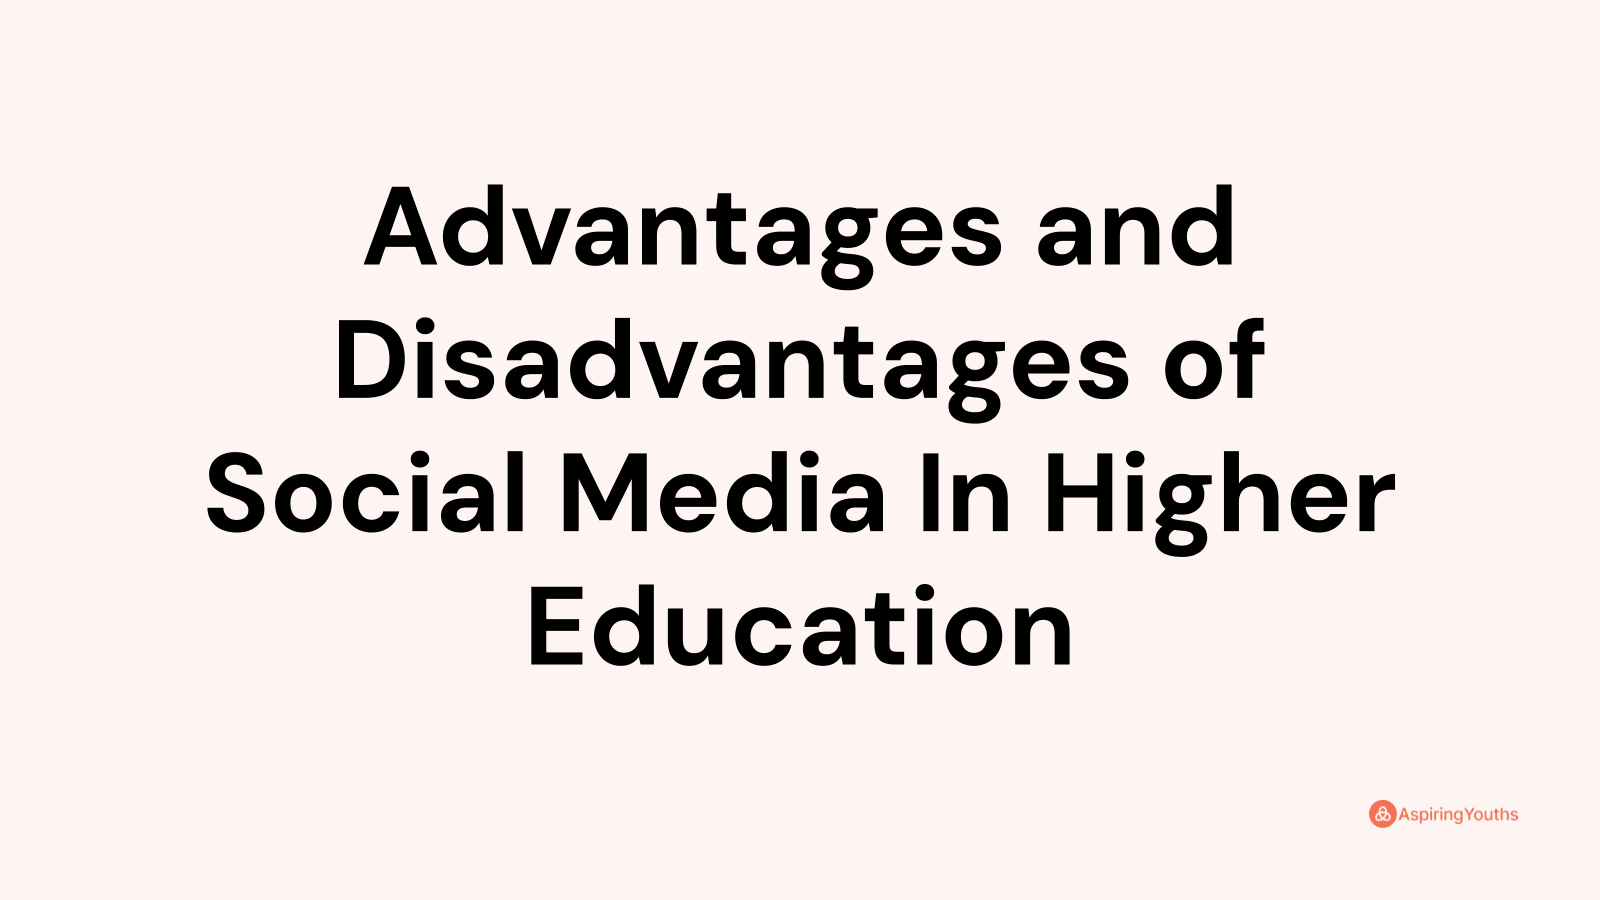 Advantages and disadvantages of Social Media In Higher Education